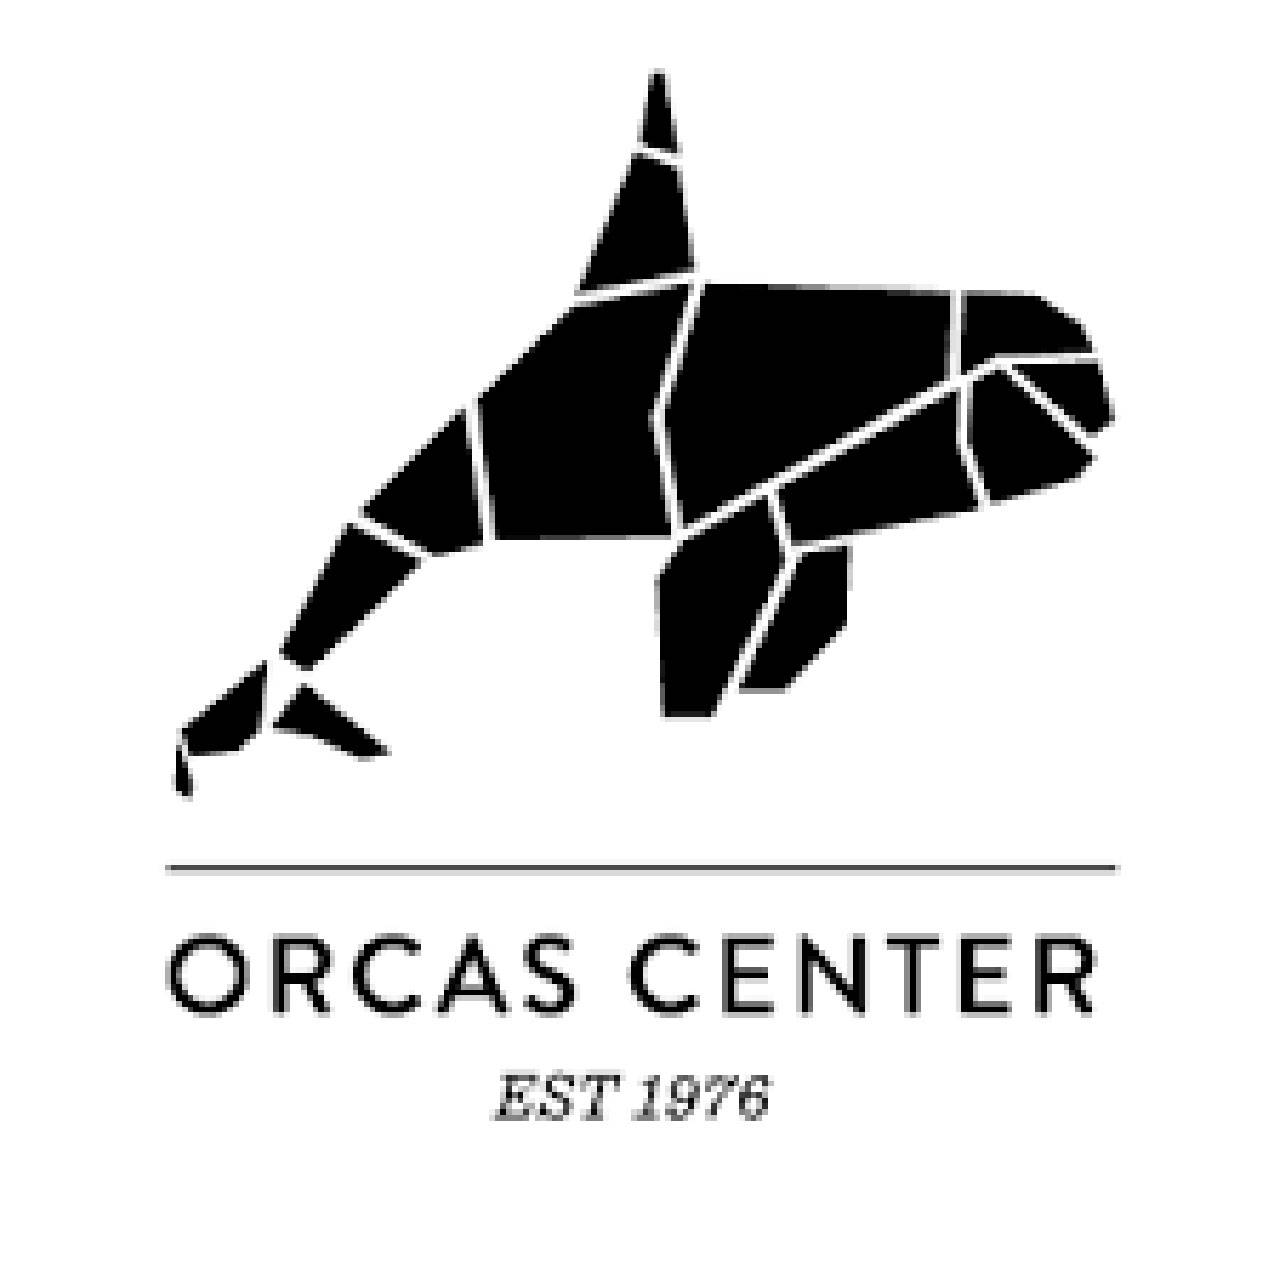 News from Orcas Center